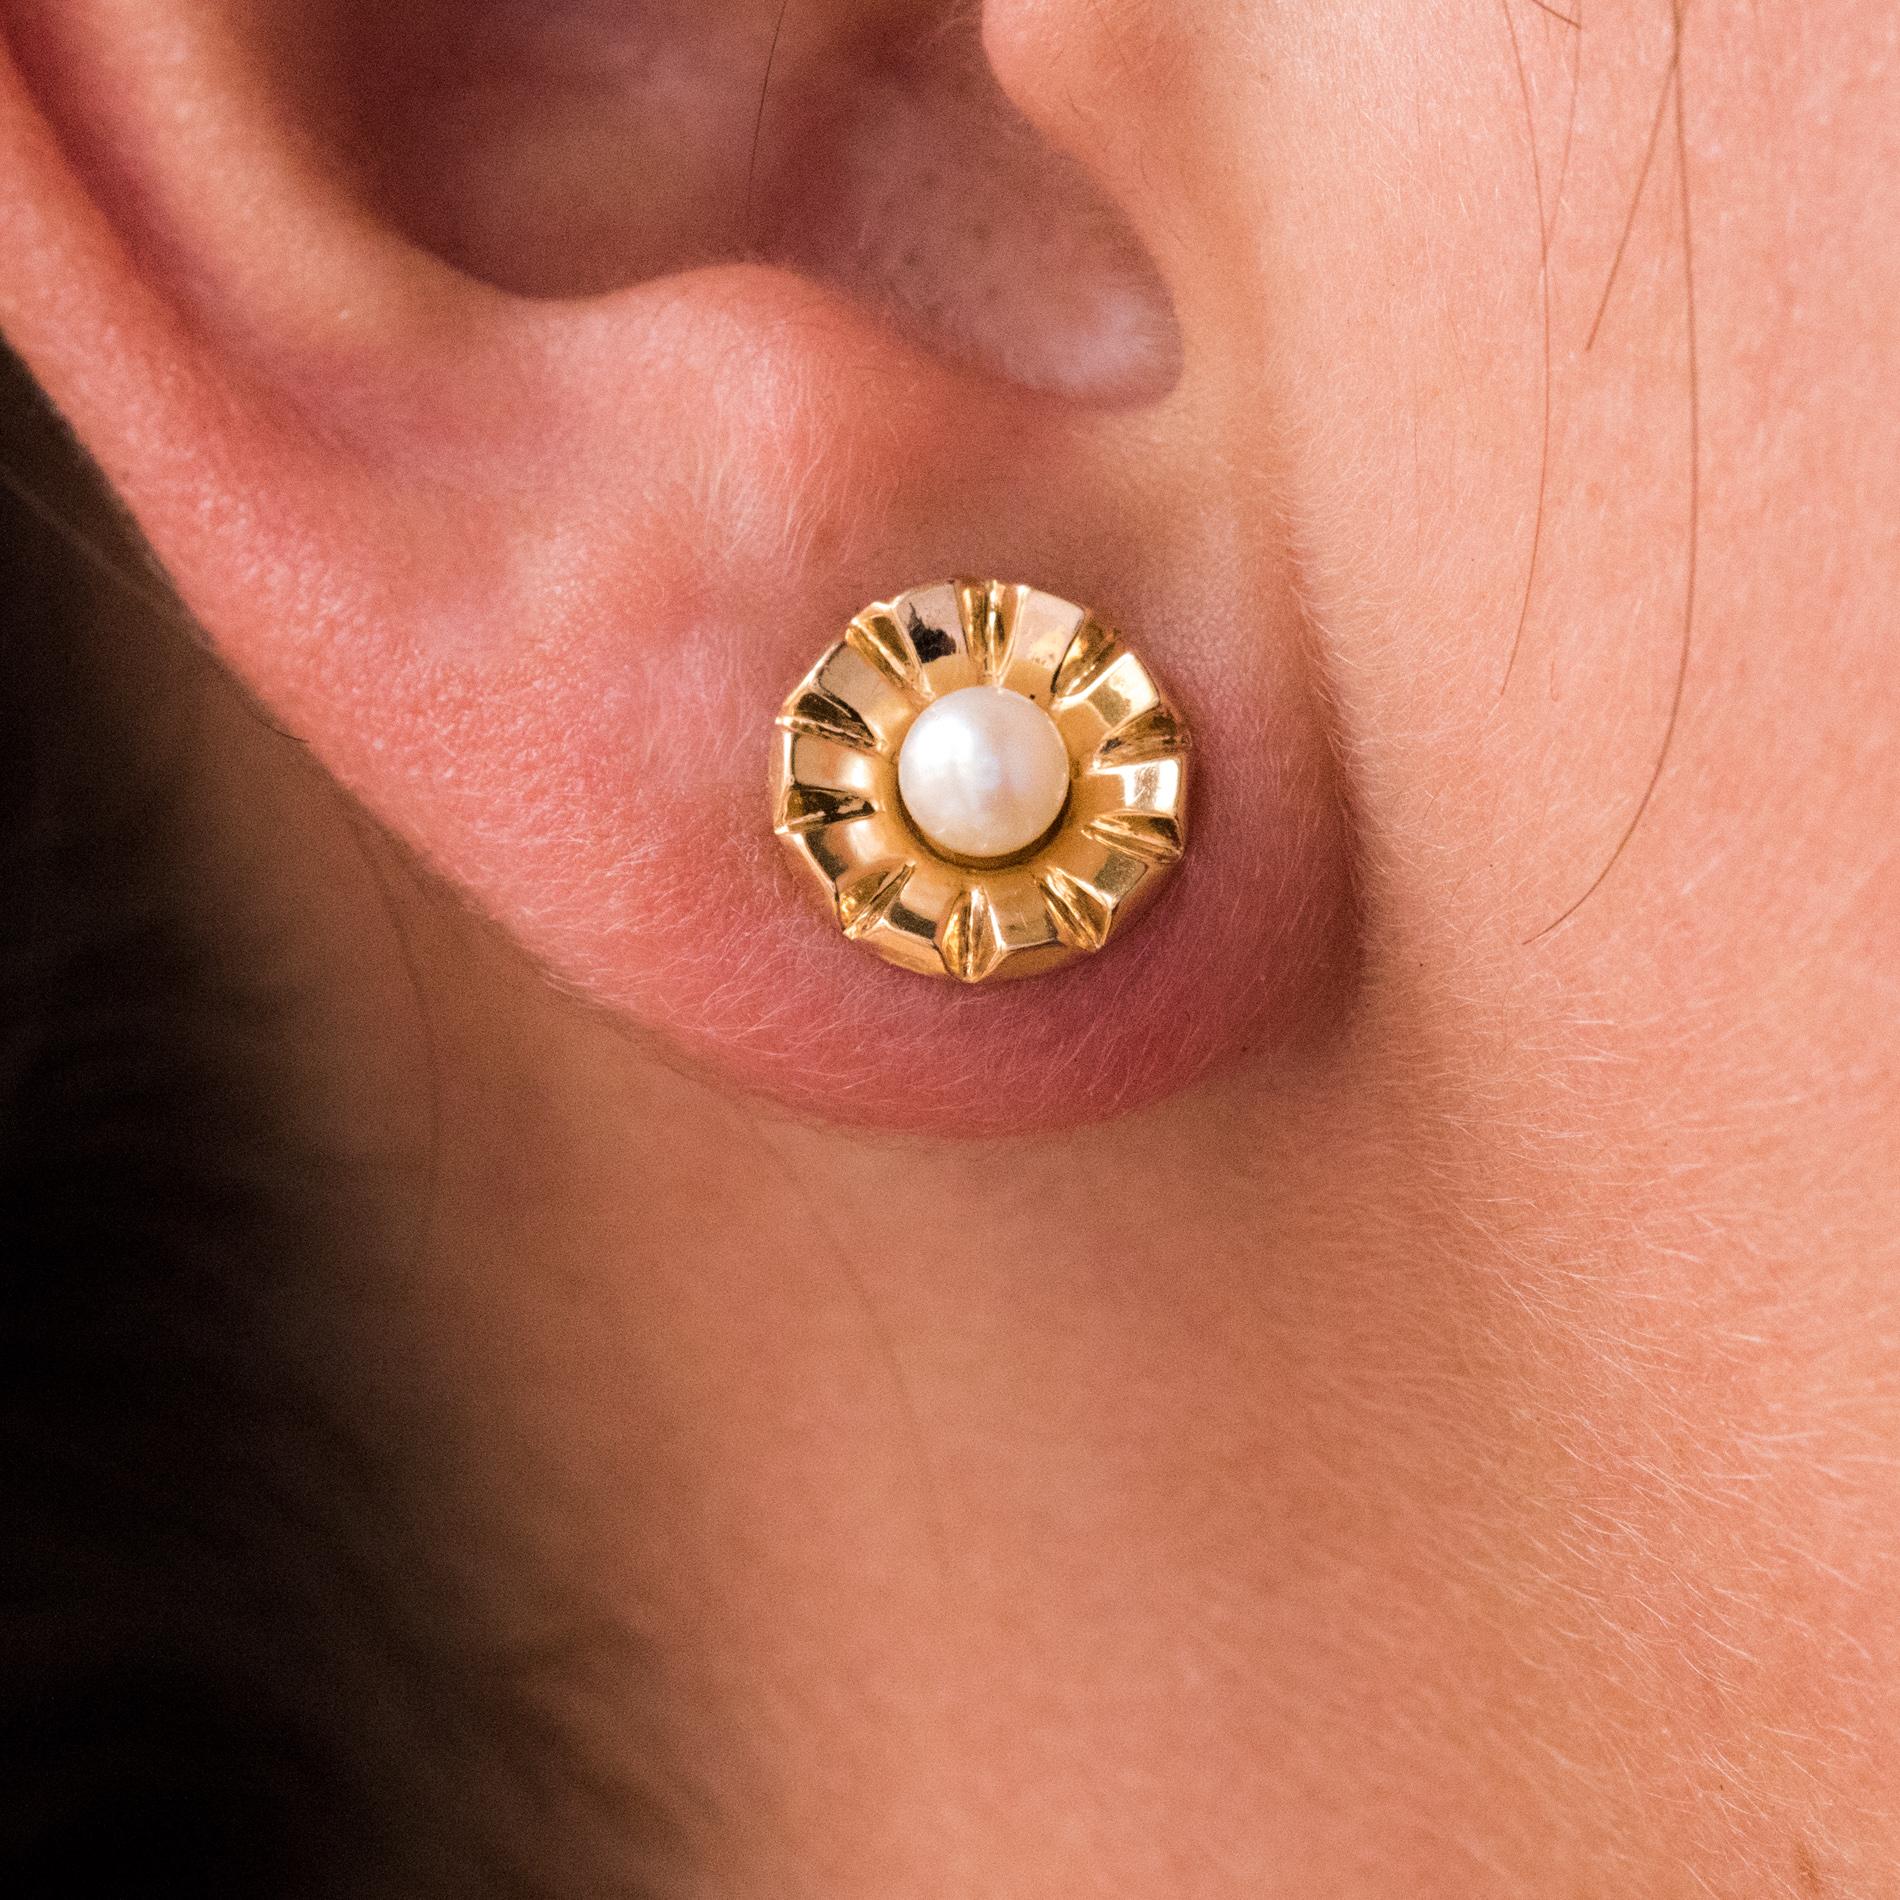 For pierced ears.
Earrings in 18 karat yellow gold, eagle's head hallmark.
Lovely retro earrings, they are made of a chiseled round corolla whose heart is set with a round white orient cultured pearl. The clasp is screw.
Diameter of the pearls : 3.5